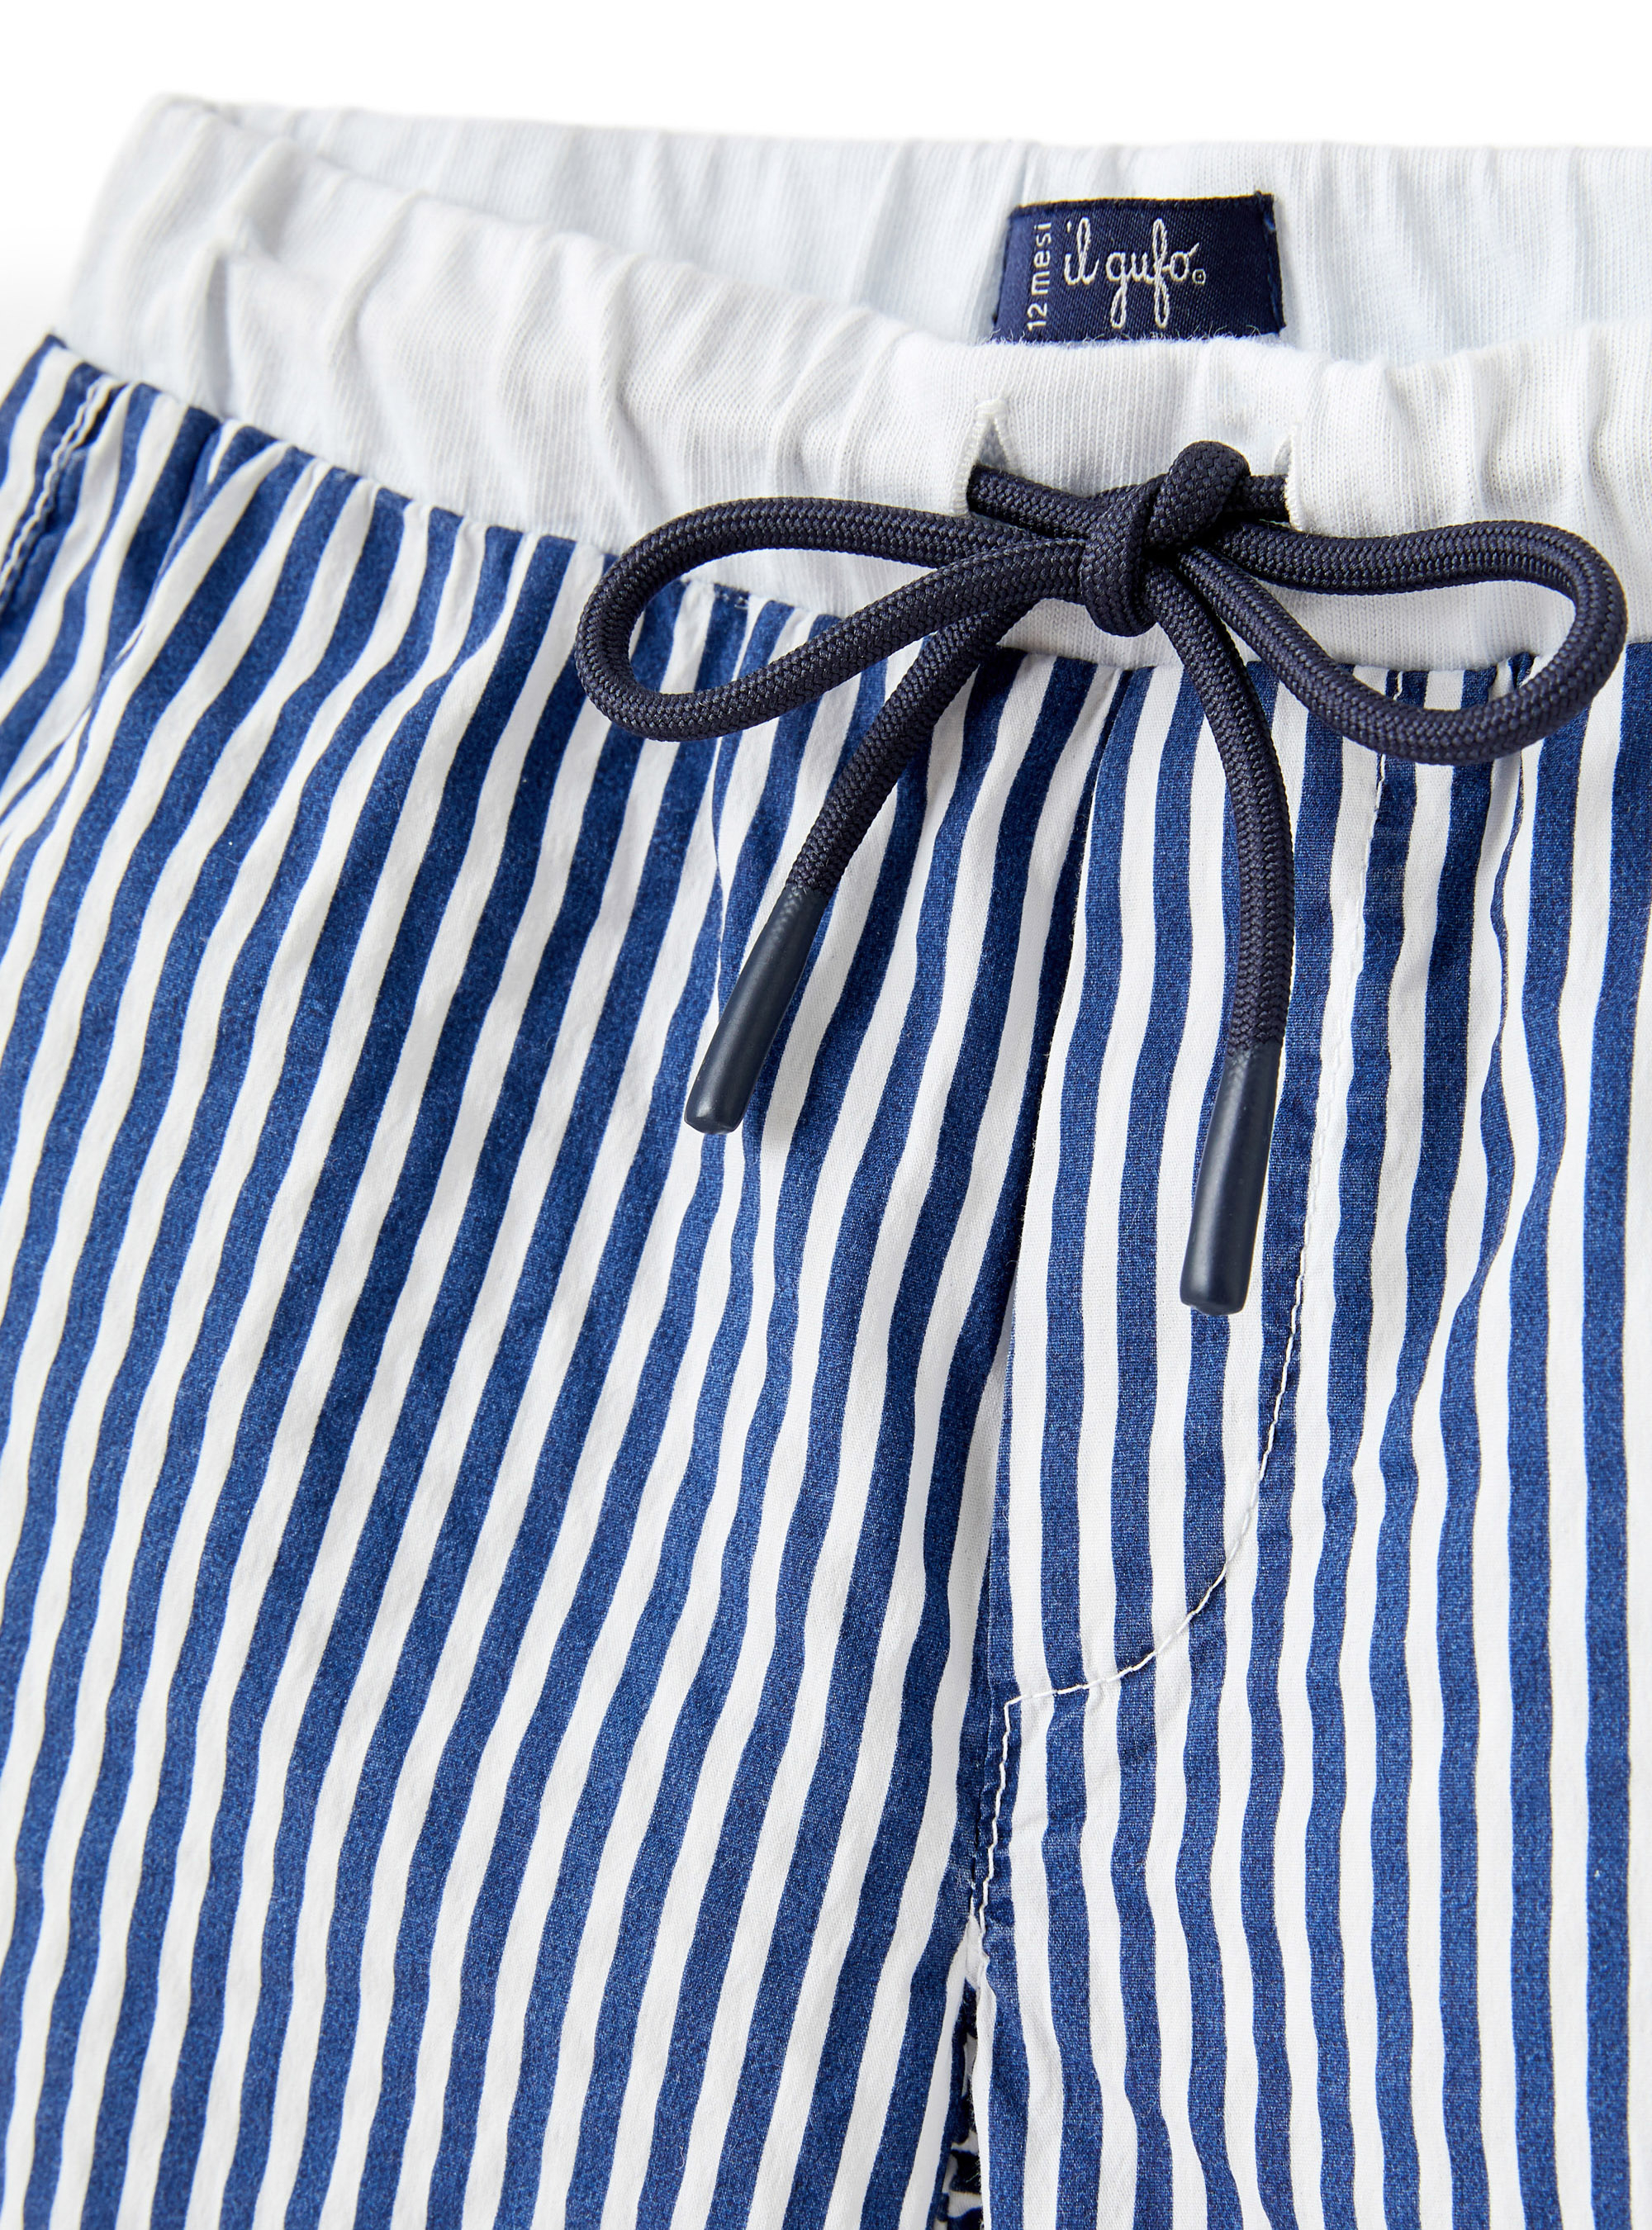 Two-piece suit with small stripes - White | Il Gufo